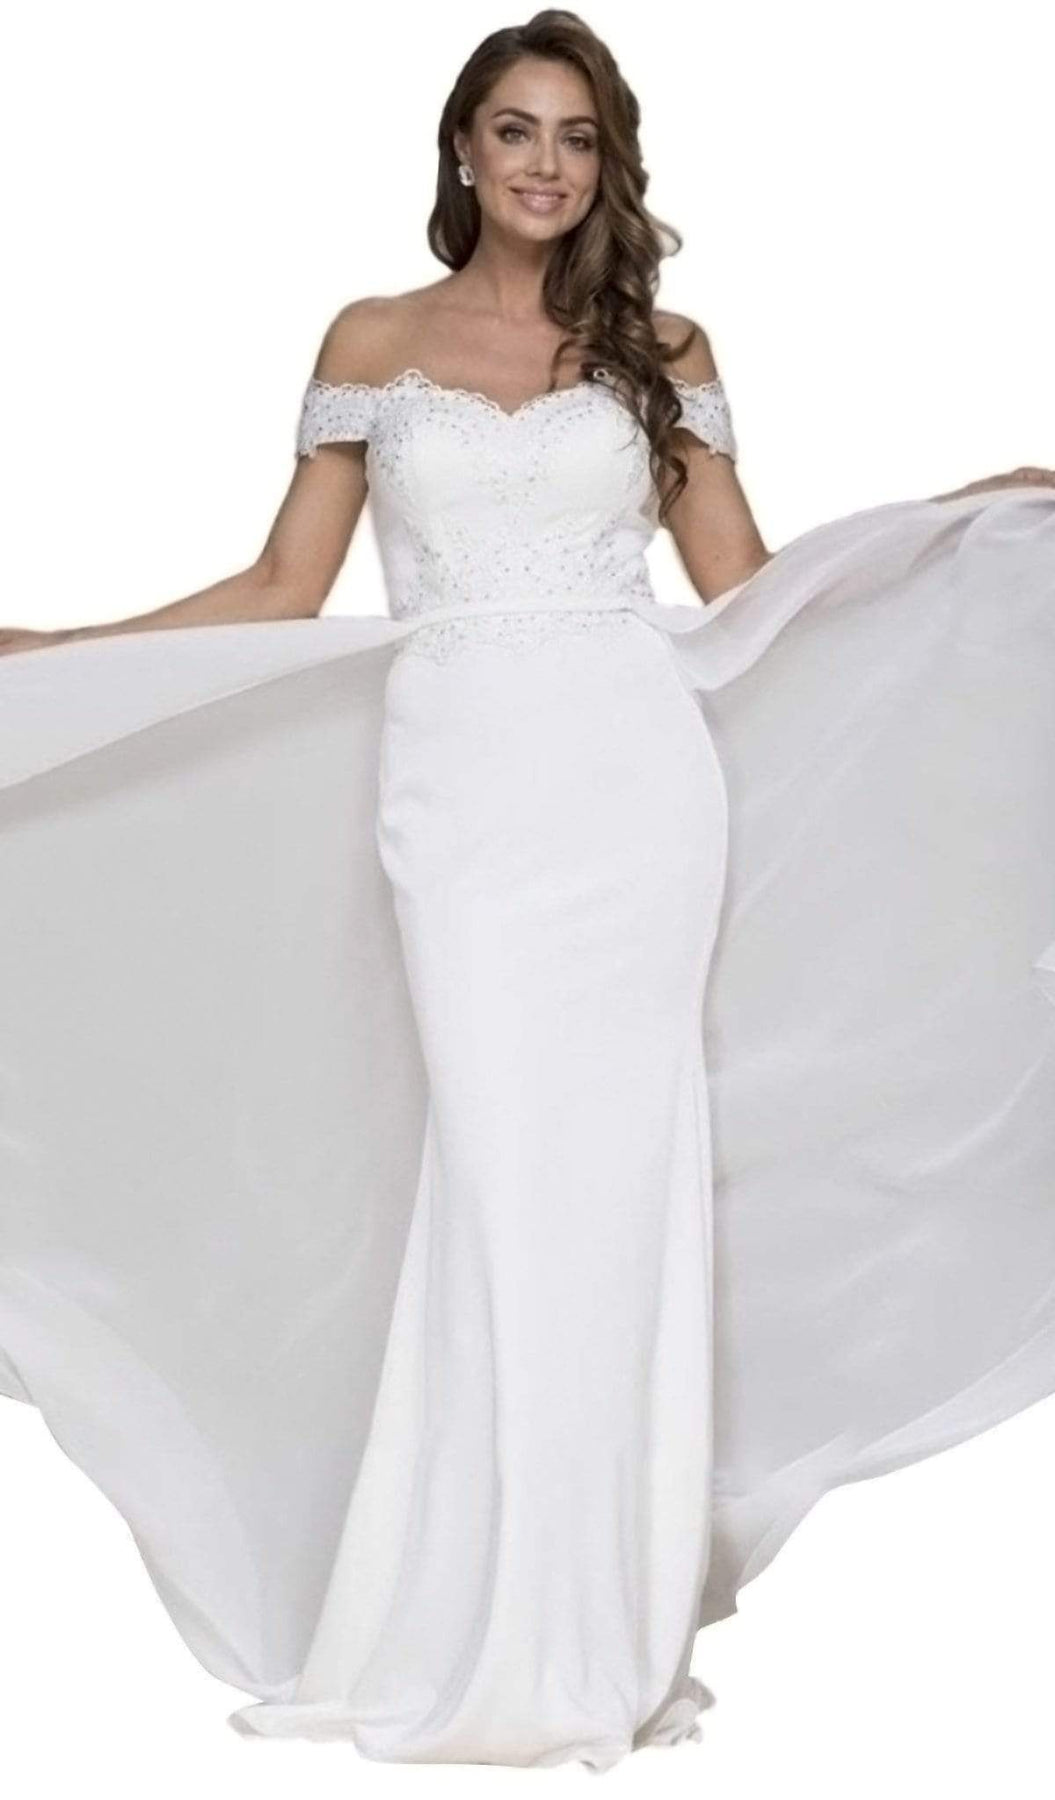 Nox Anabel - E014 Embellished Off-Shoulder Sheath Dress Special Occasion Dress XS / Off White